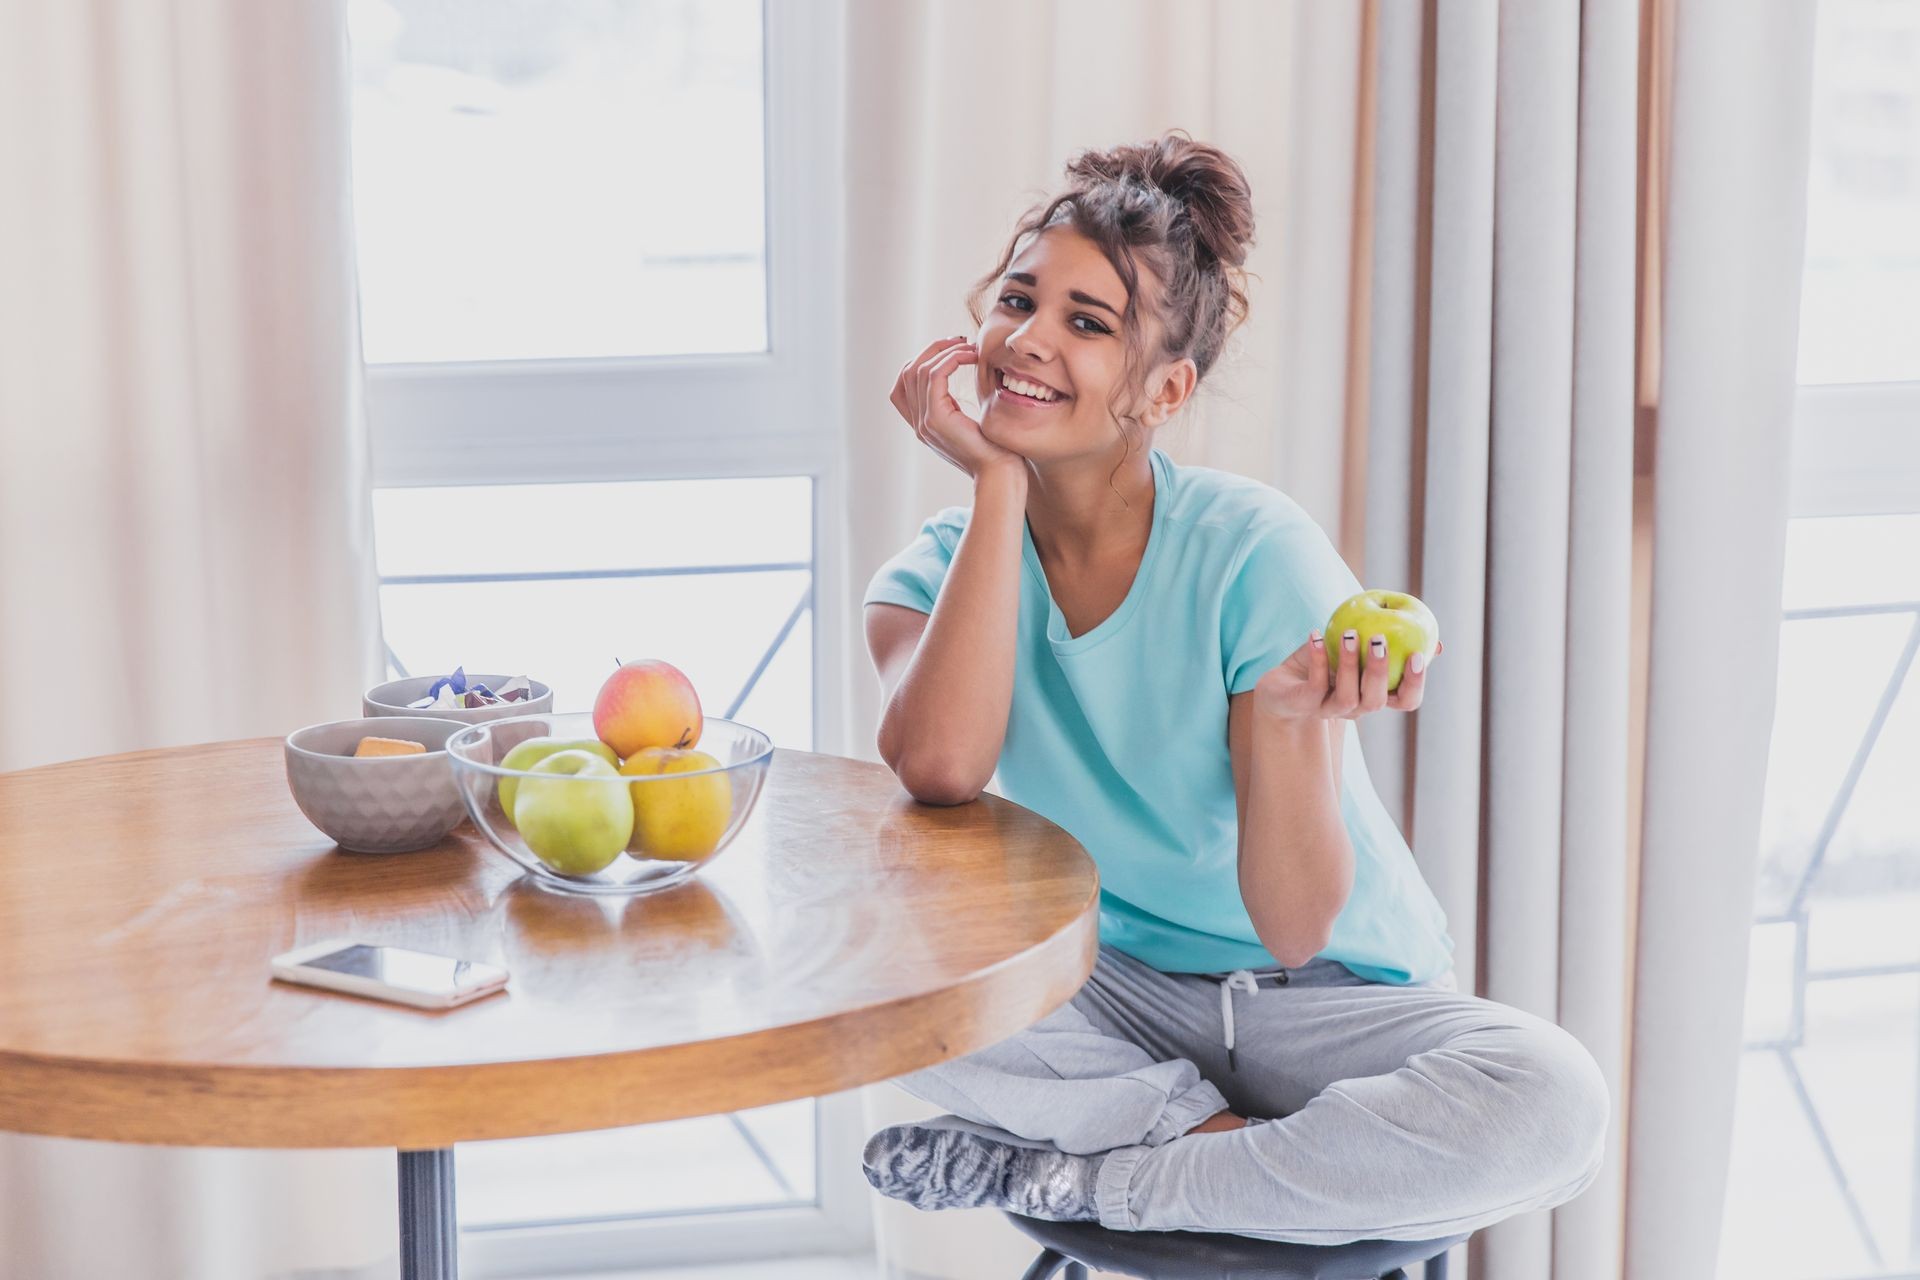 Young Happy Woman Refreshing with Cup of Coffee, Snacks and Fresh Fruit at the Kitchen Table in the Early Morning.